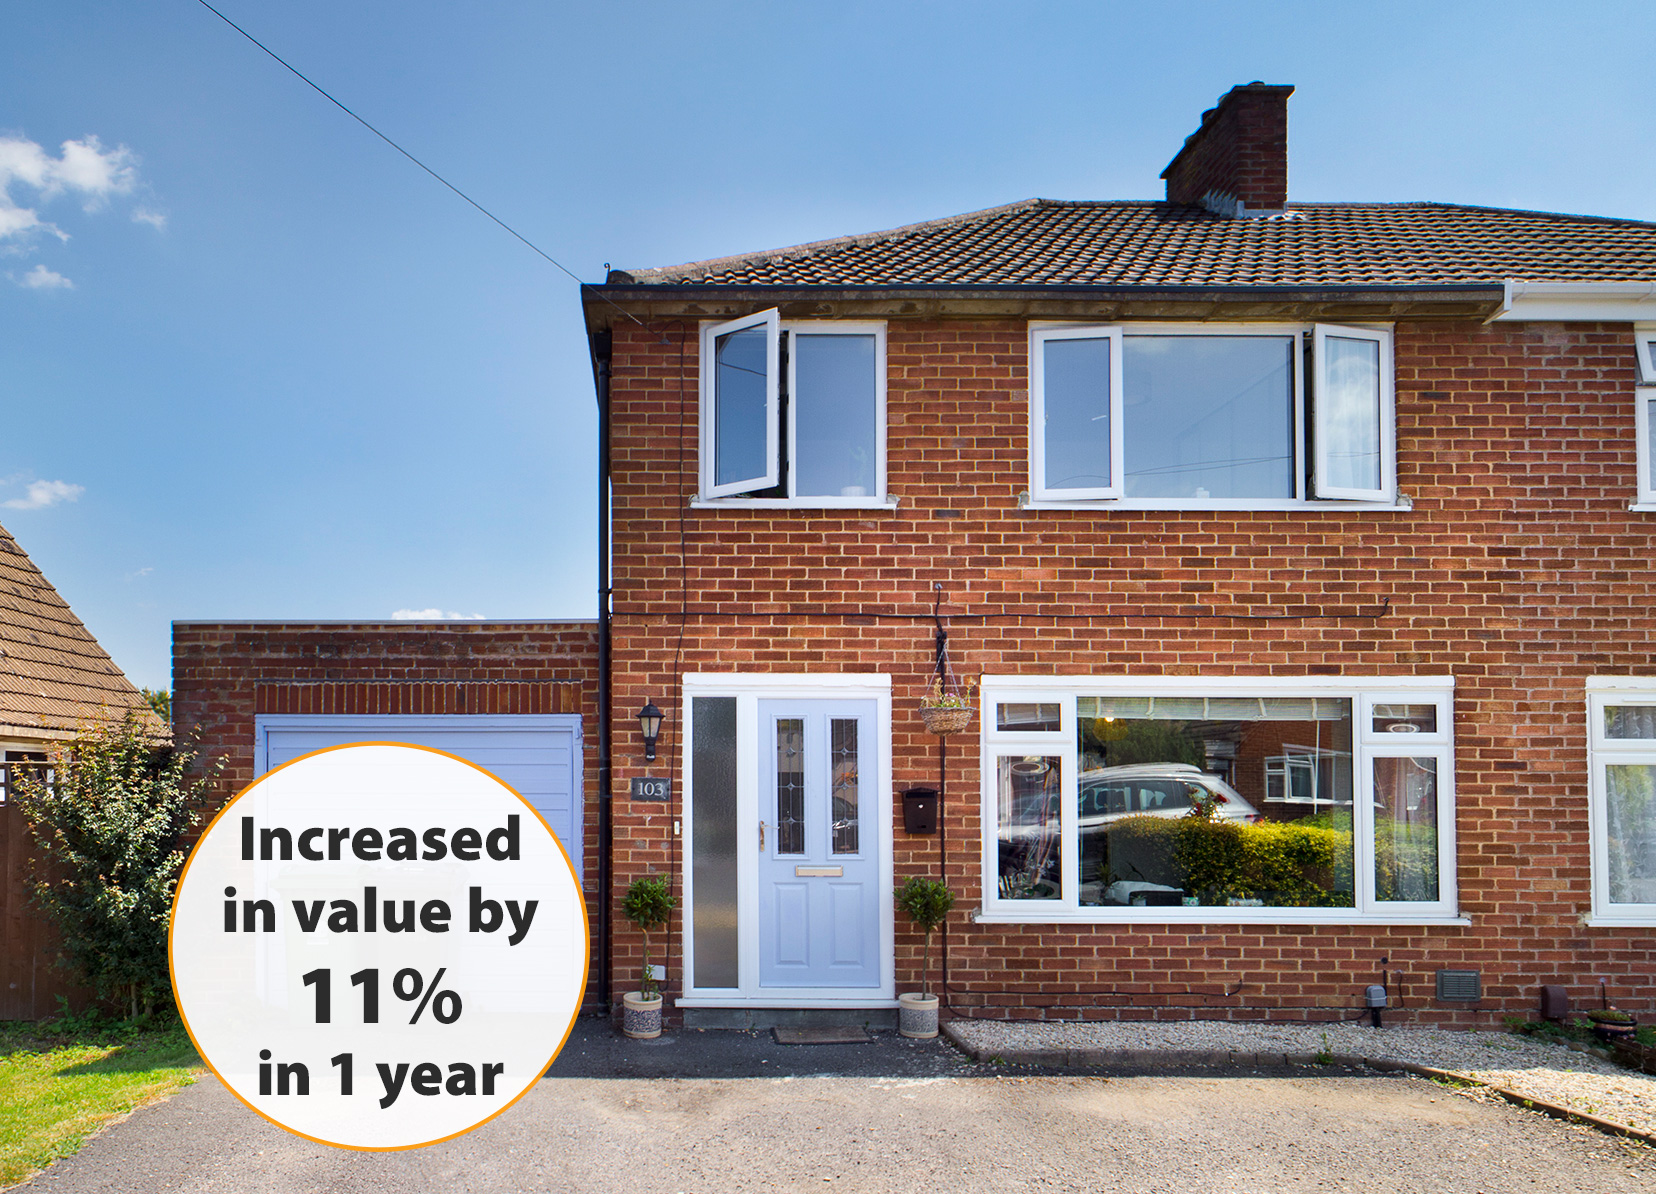 11 percent increase in value longlevens oxstalls drive